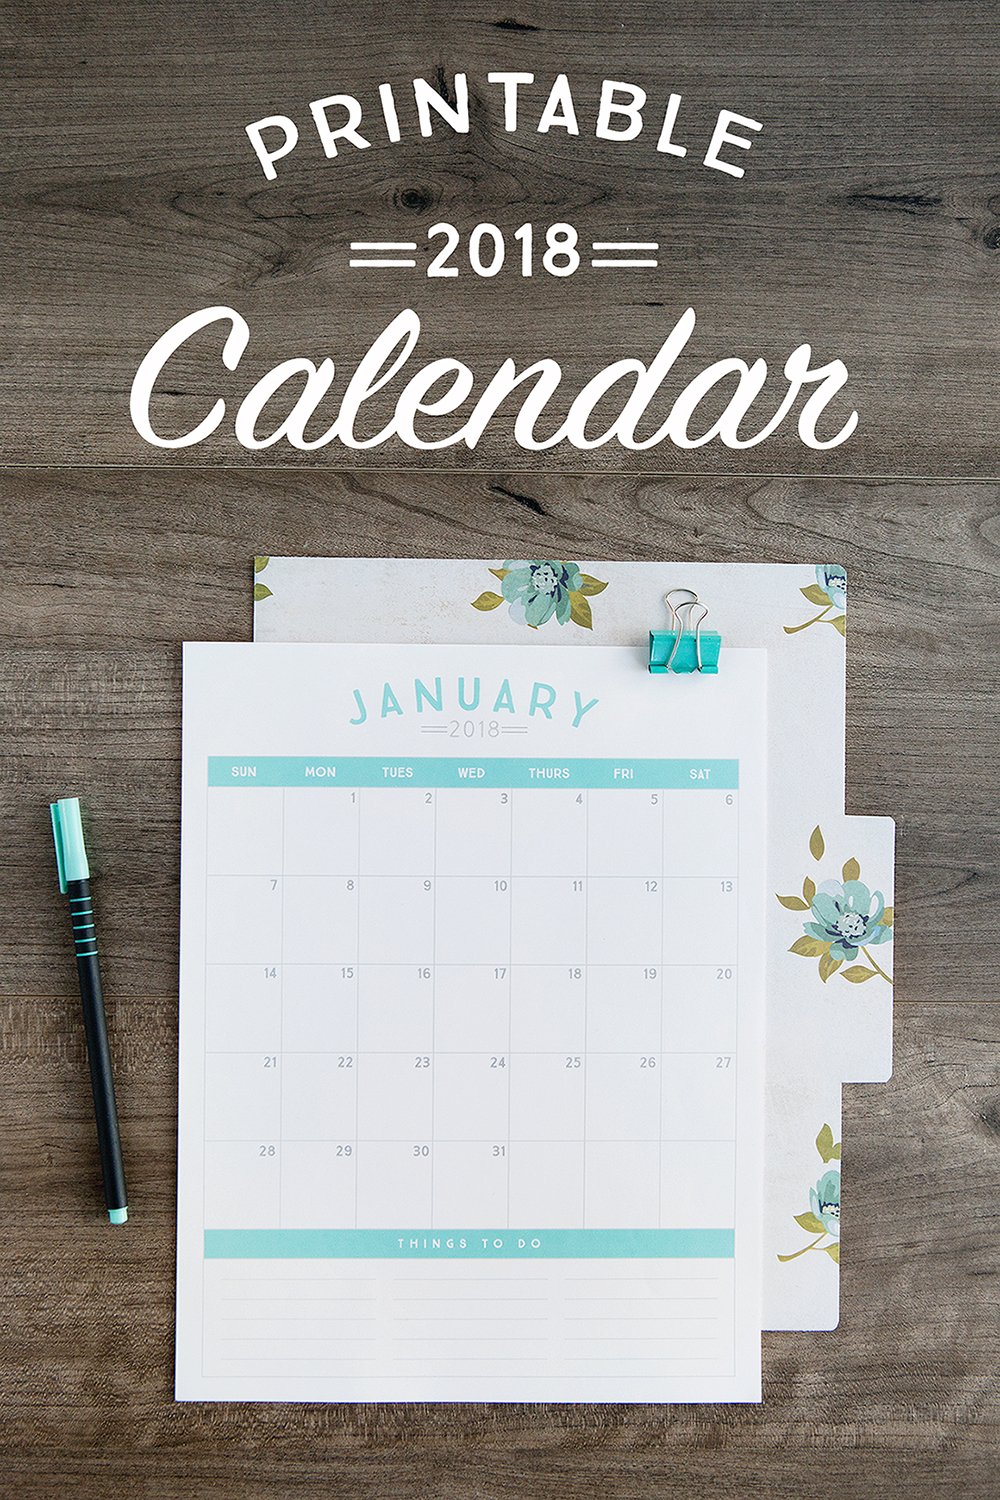 Get organized with these 2018 Printable Calendars!